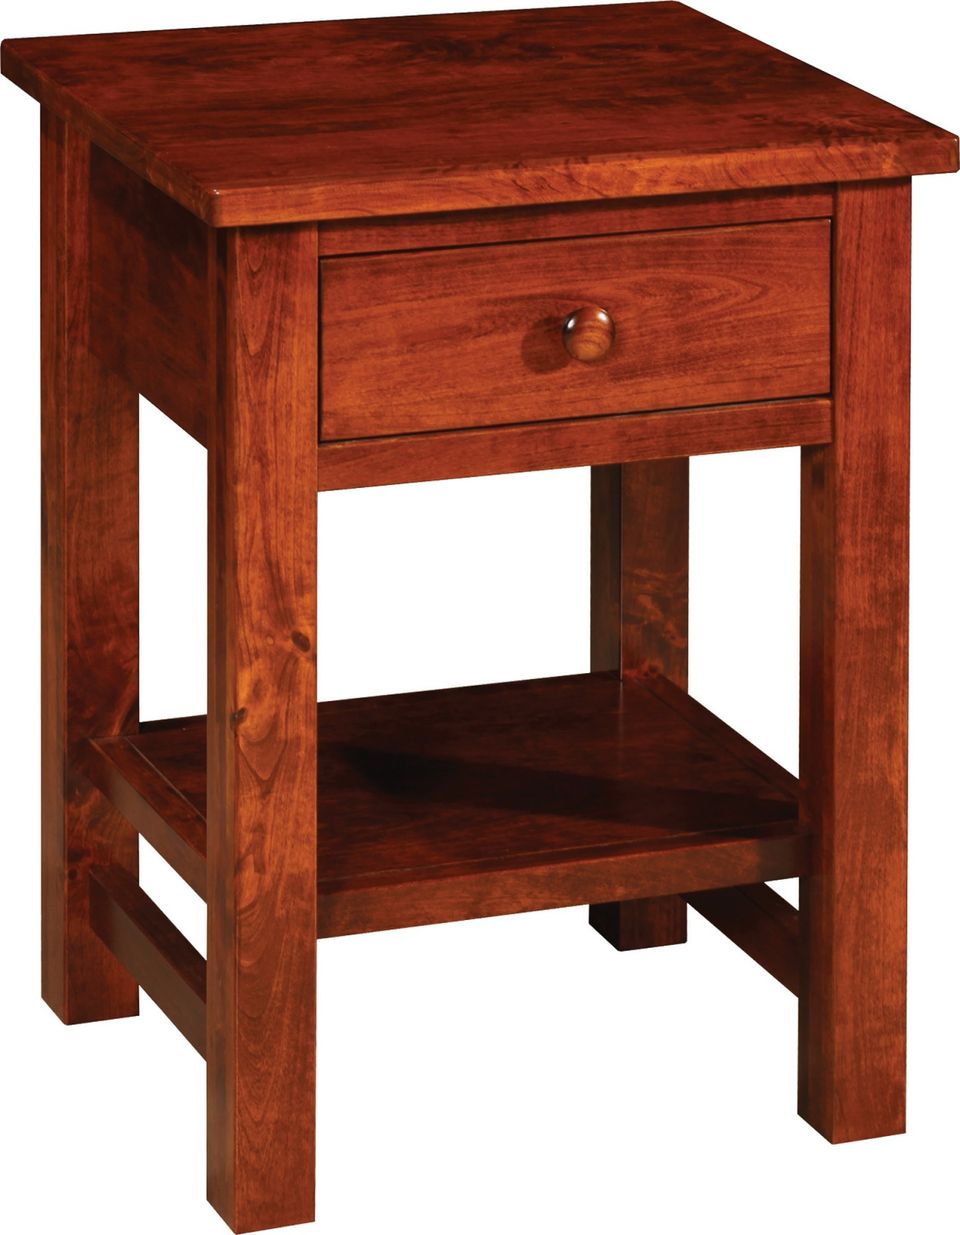 Nc ca 540 small end night table